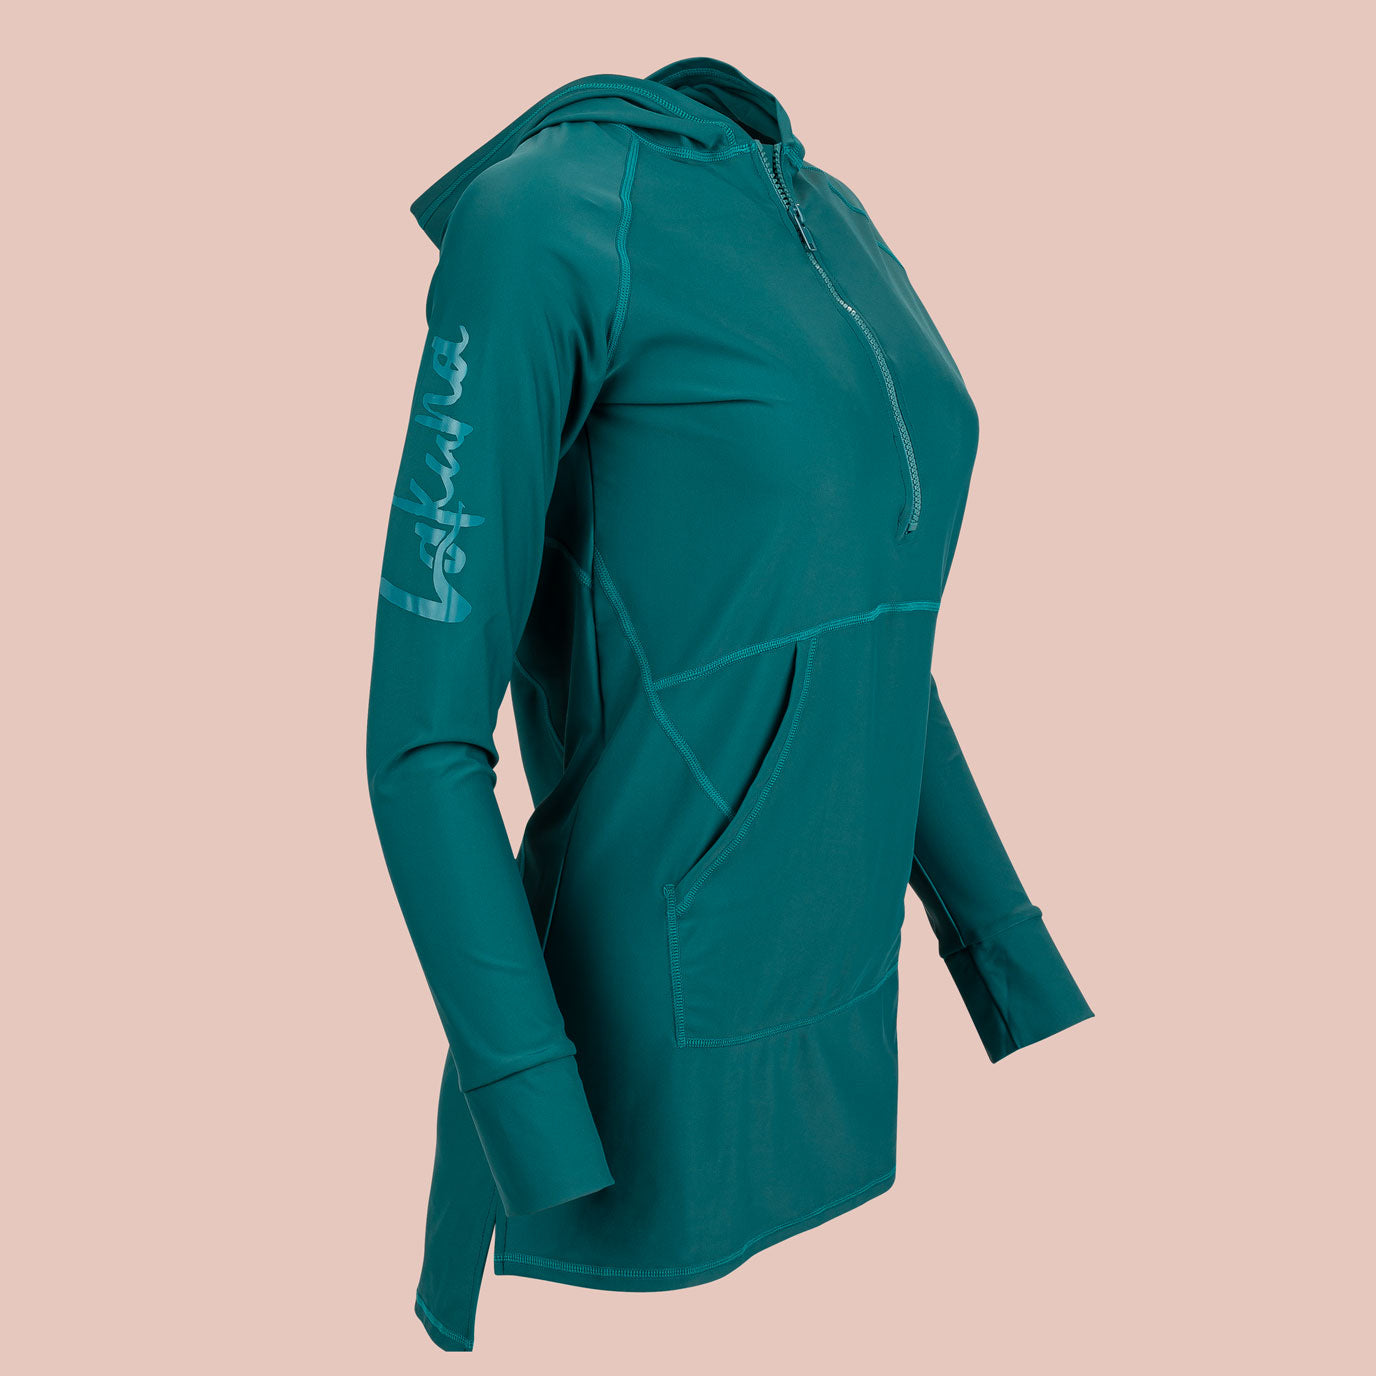 TROPICAL TEAL Hooded Swim Tunic with pocket